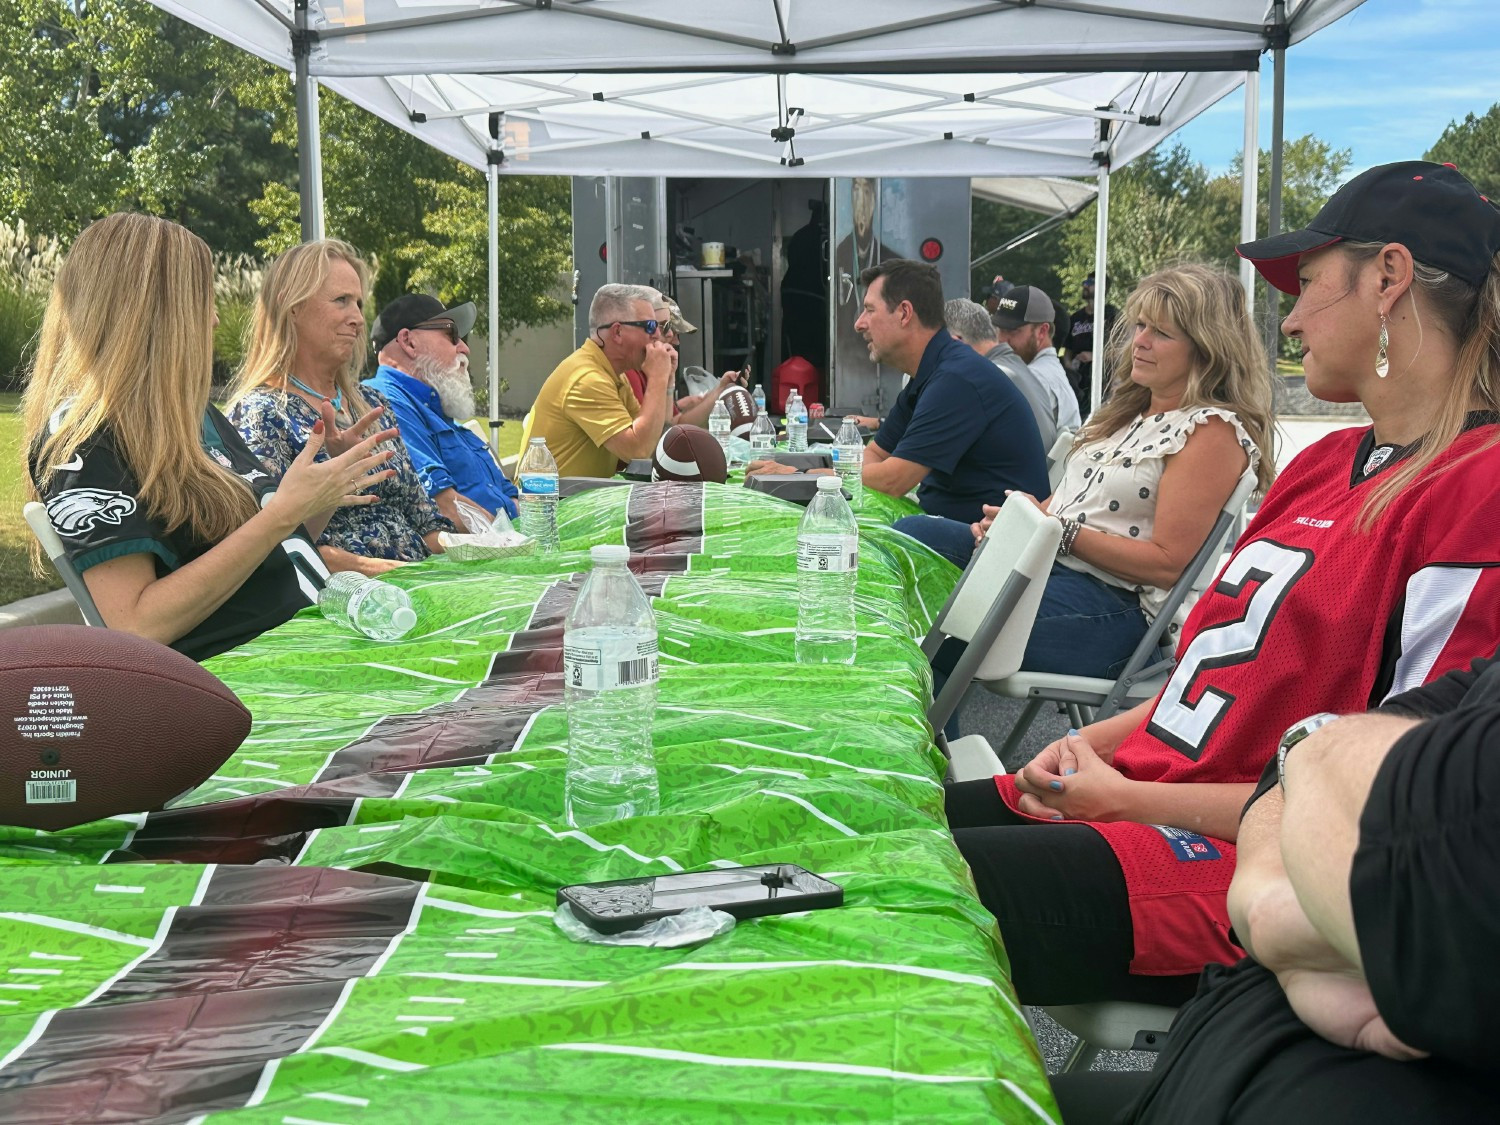 College Football is KING in the South.  We celebrated by sharing our favorite tailgate food at a FTI cookout.